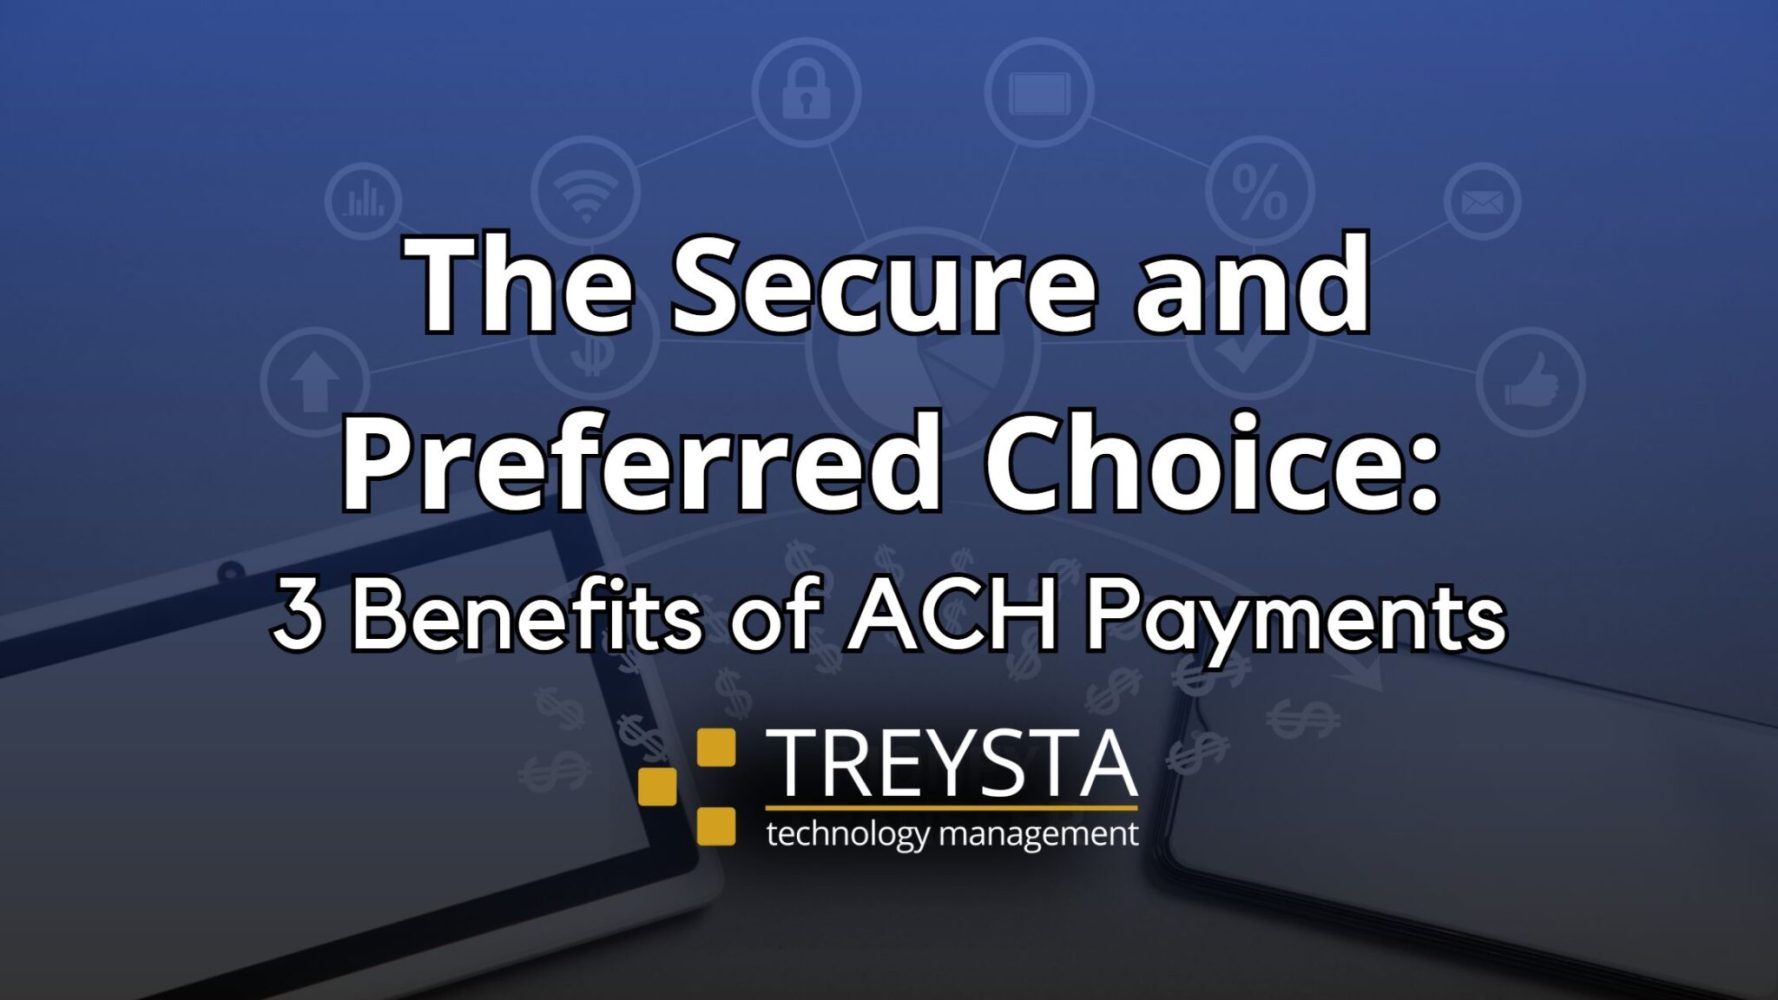 The Secure and Preferred Choice: 3 Benefits of ACH Payments